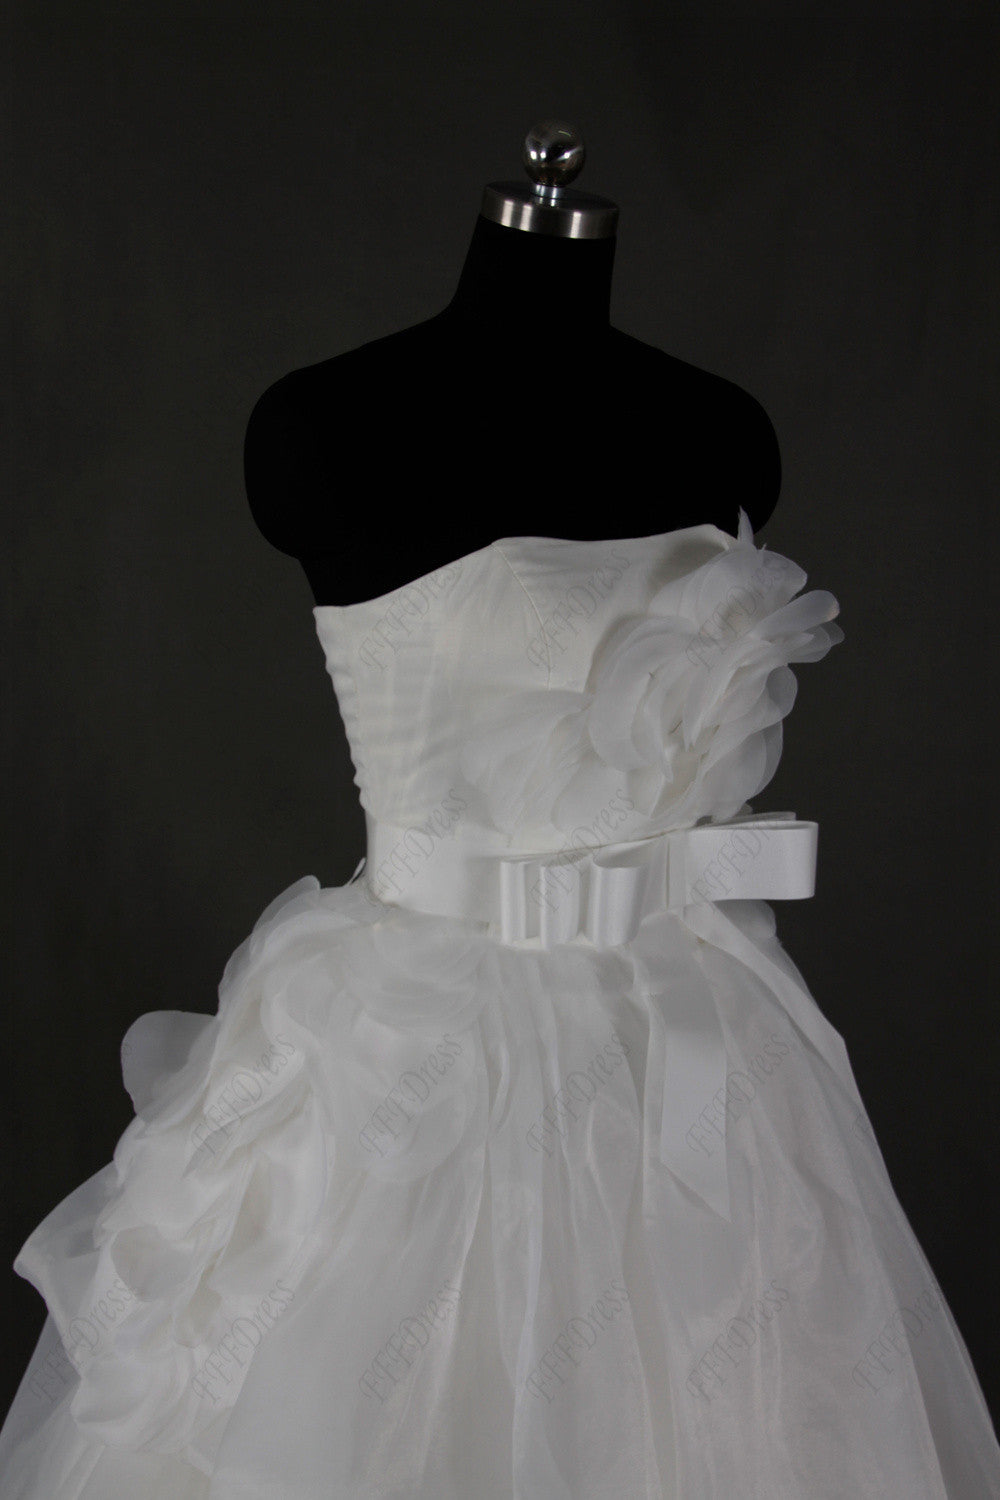 Flwoers pick up ball gown wedding dress with sash